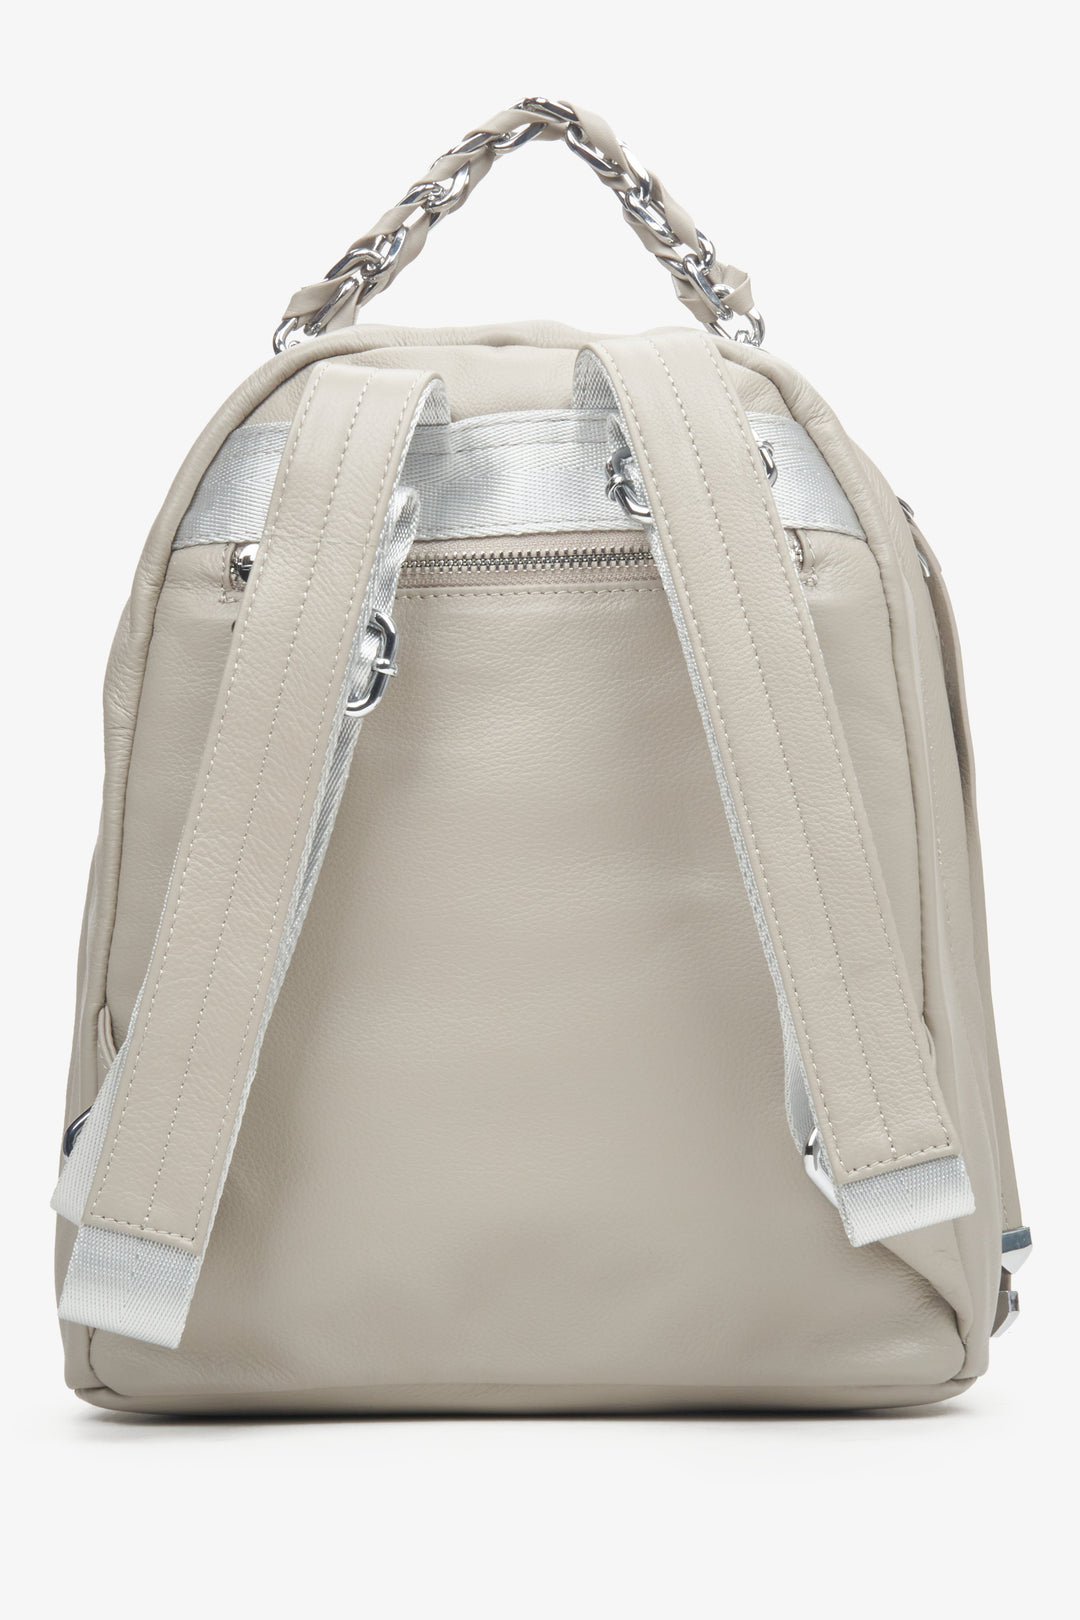 Estro's large, women's light grey leather backpack - close-up of the back and model's shoulders.